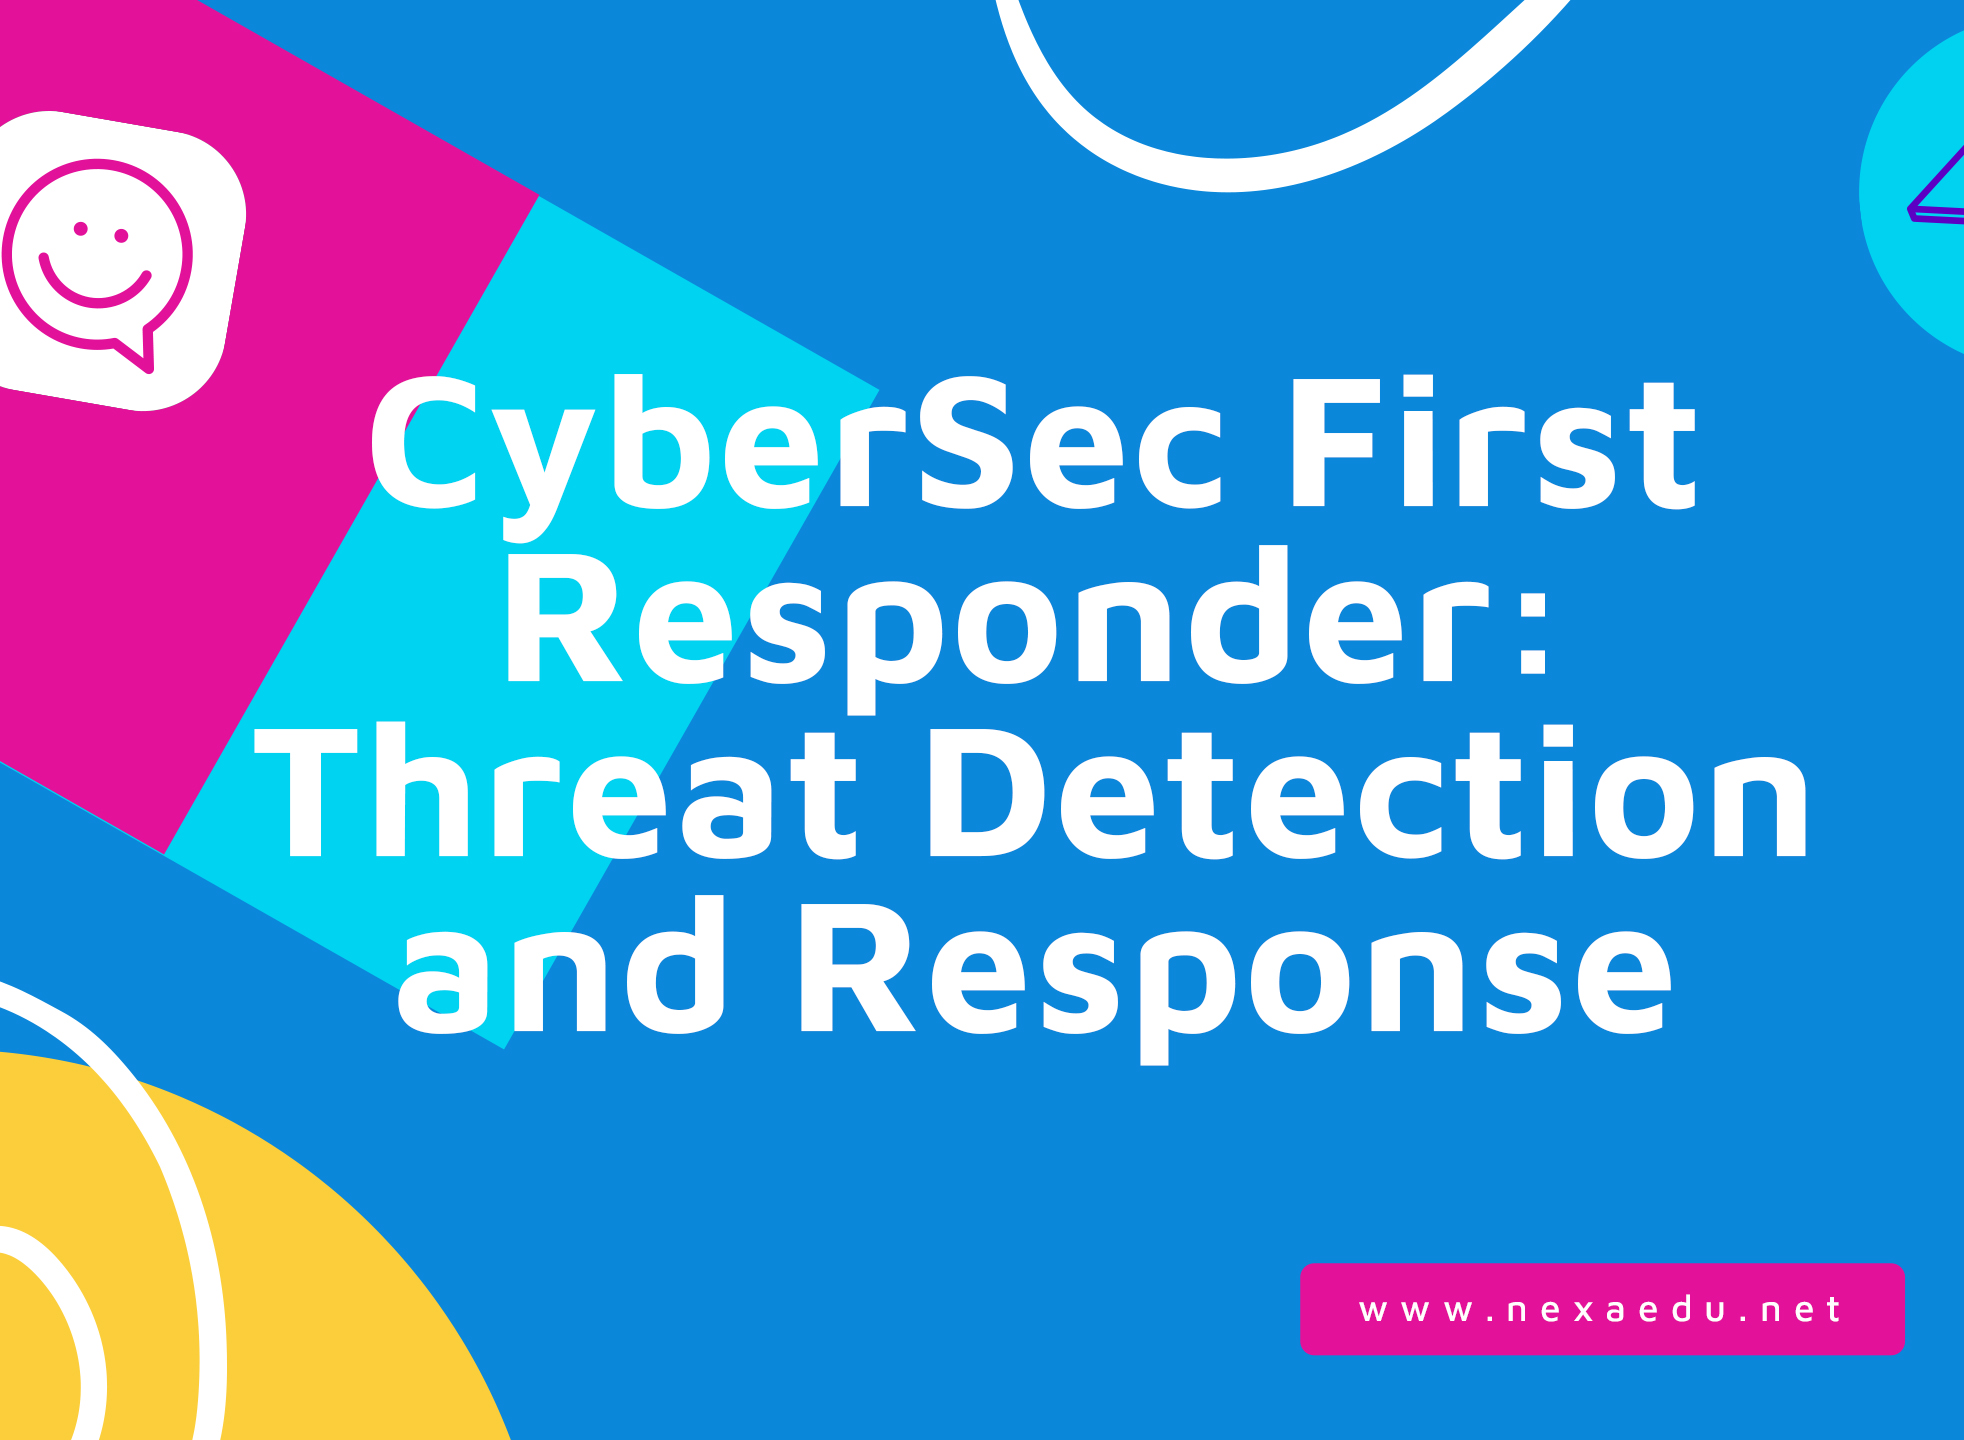 CyberSec First Responder: Threat Detection and Response